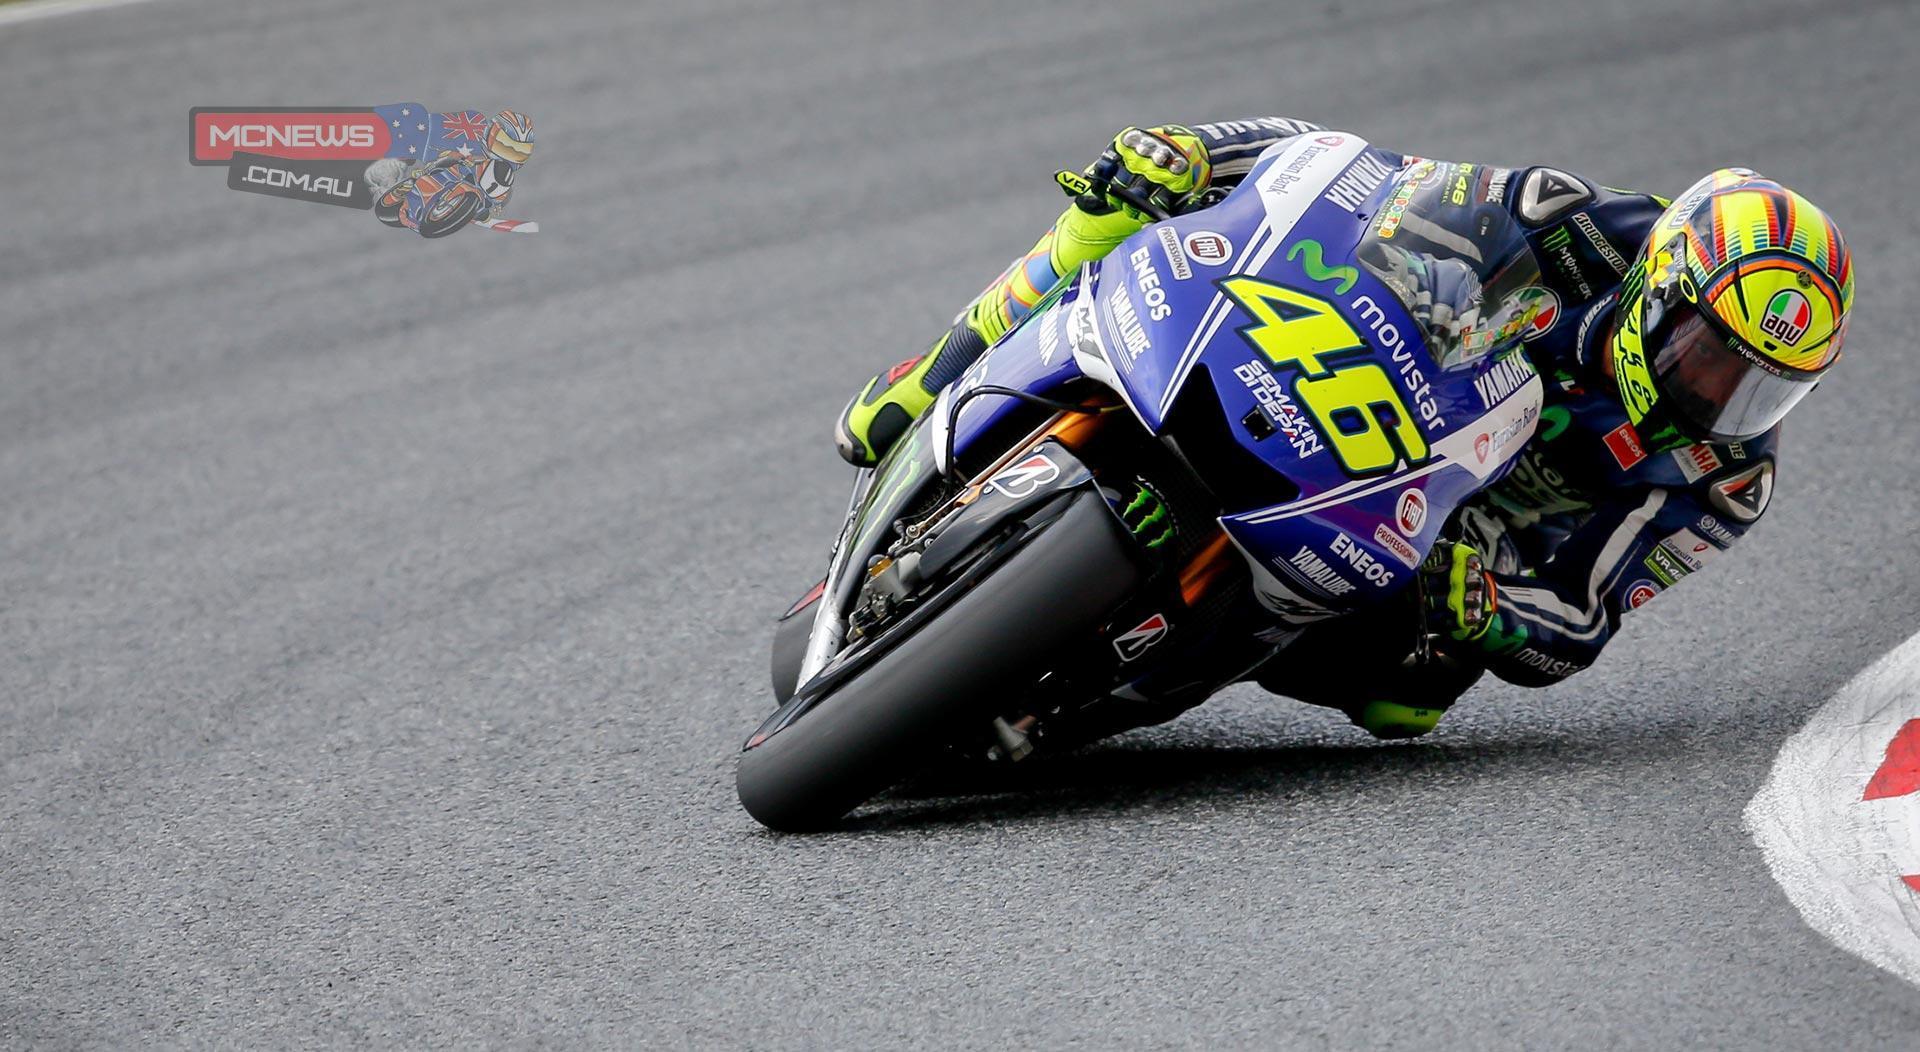  VR46  Wallpapers  Wallpaper  Cave